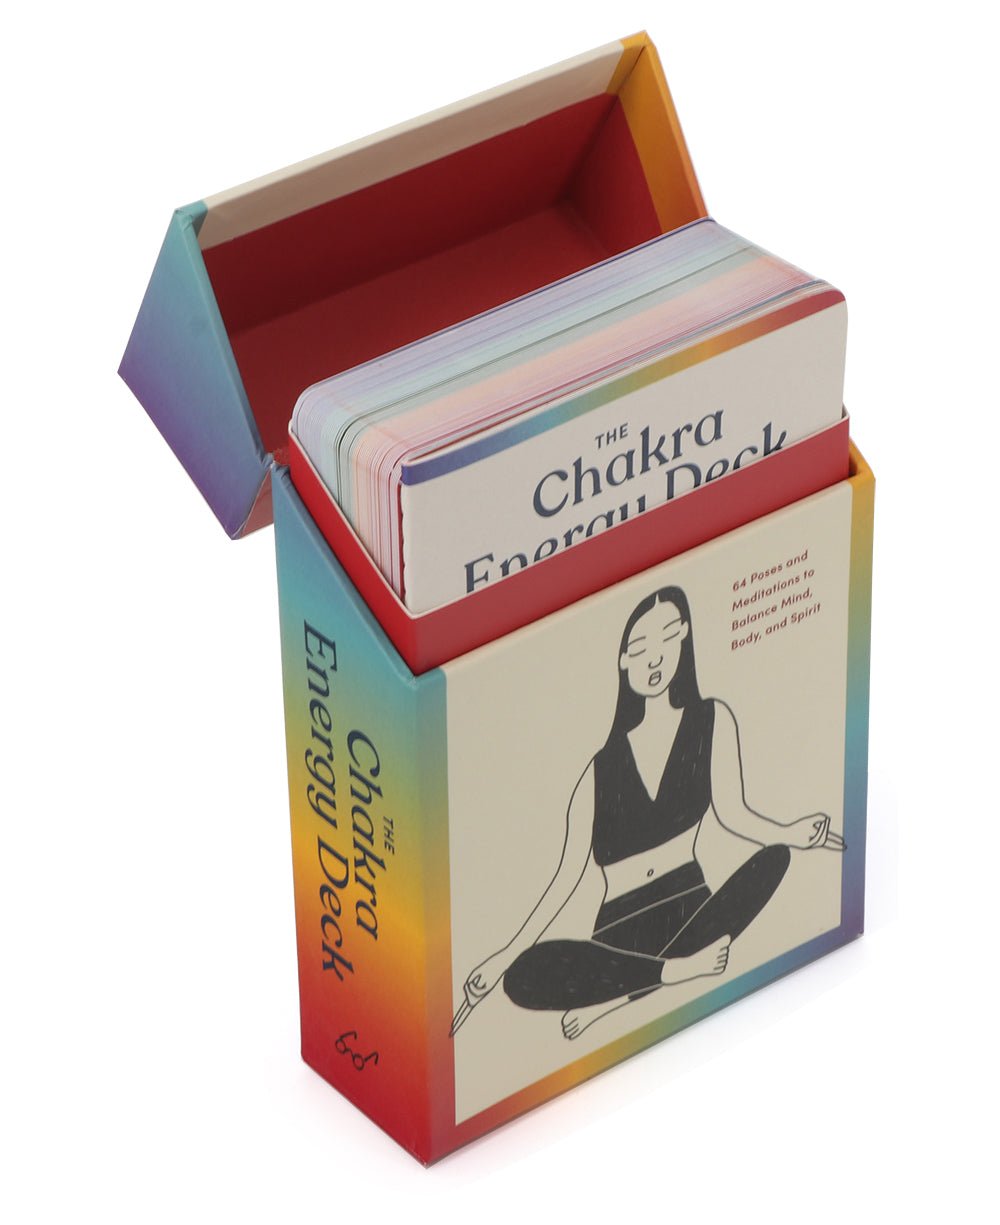 The Chakra Energy Deck, 64 Cards With 24 Page Guidebook - Card Games